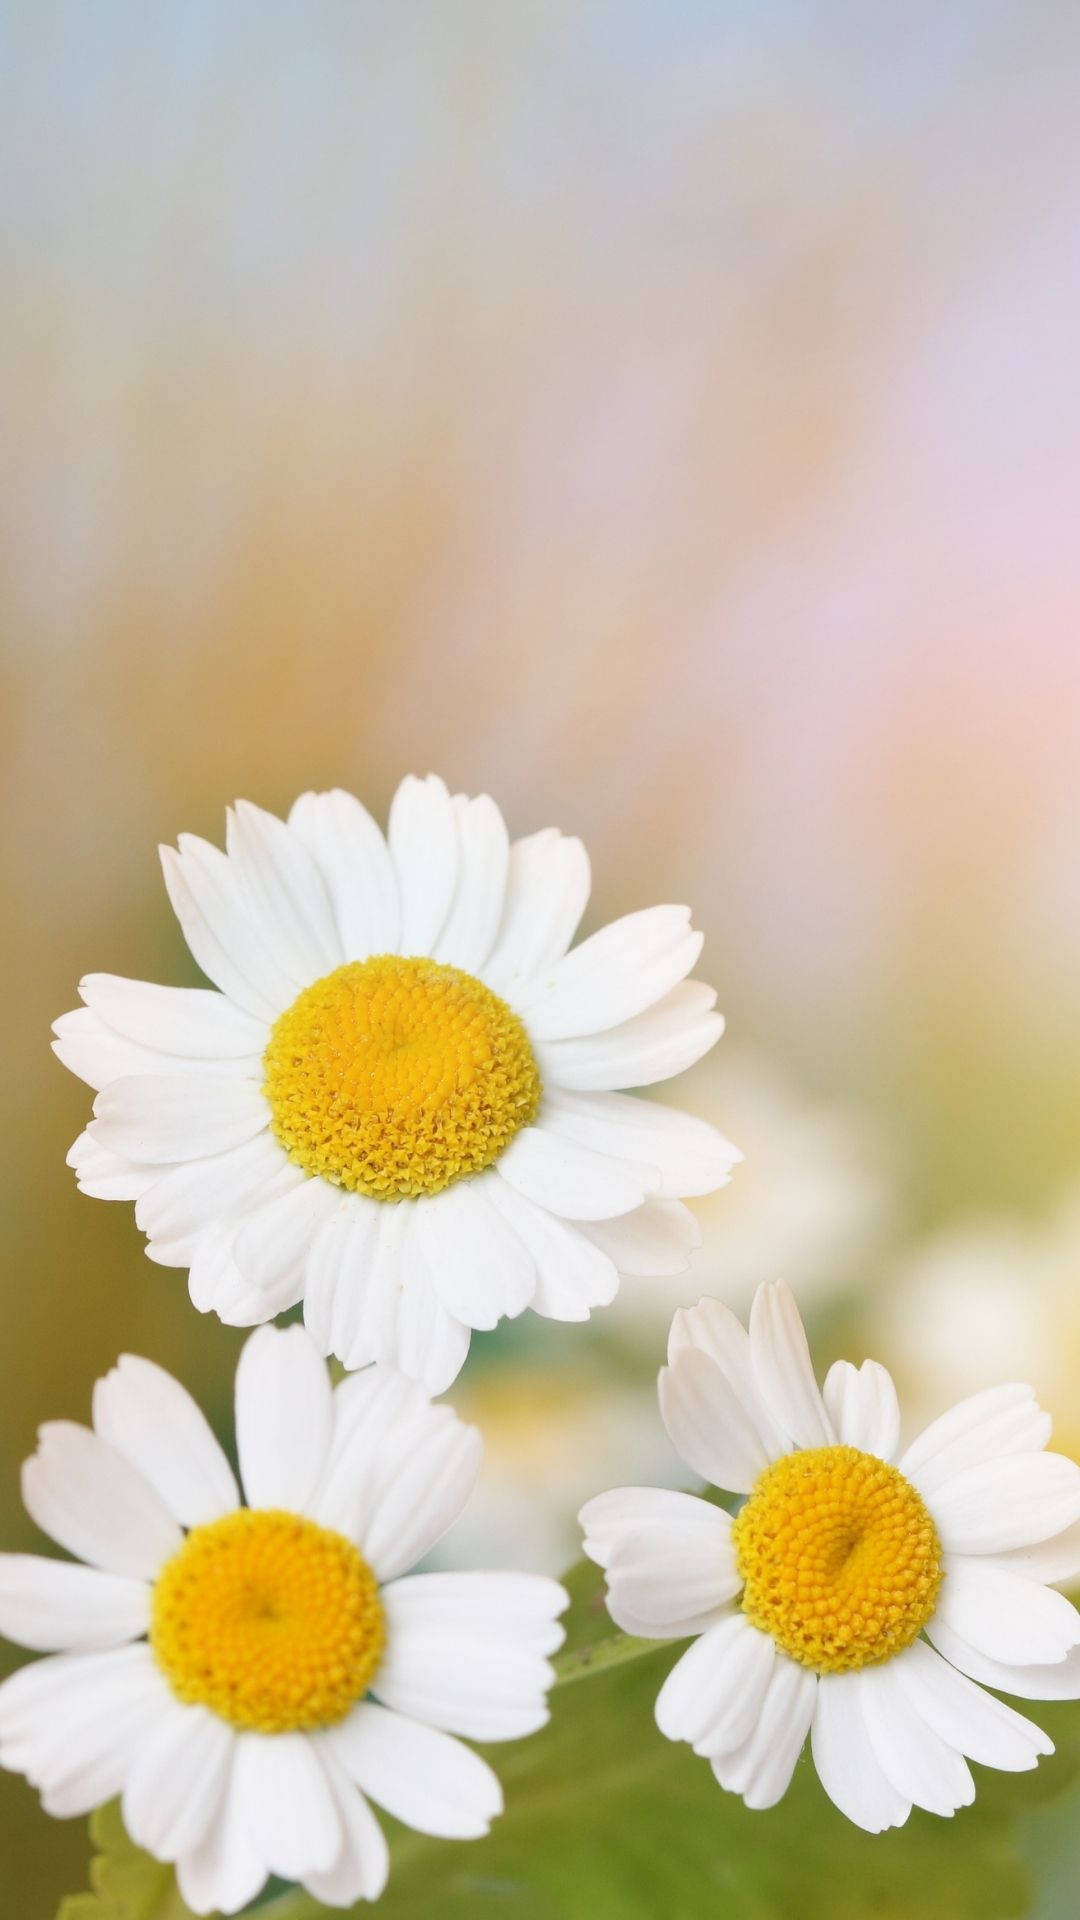 https://wallpapers.com/images/featured/daisy-iphone-ce6tzn8drg07ja2m.jpg